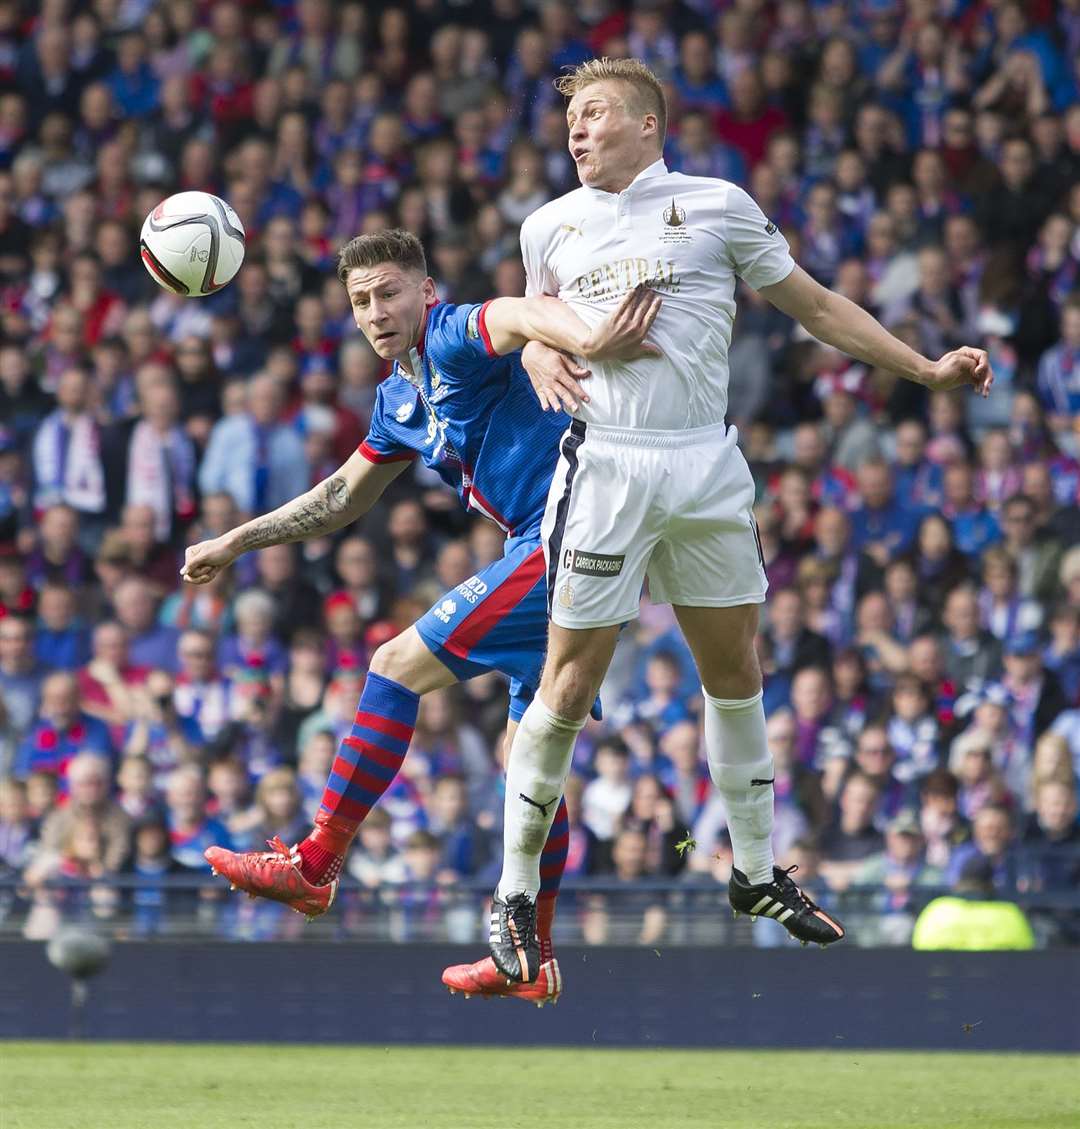 Josh Meekings (left) in action for Caley Thistle in their Scottish Cup final win against Falkirk in 2015. Picture: Ken Macpherson